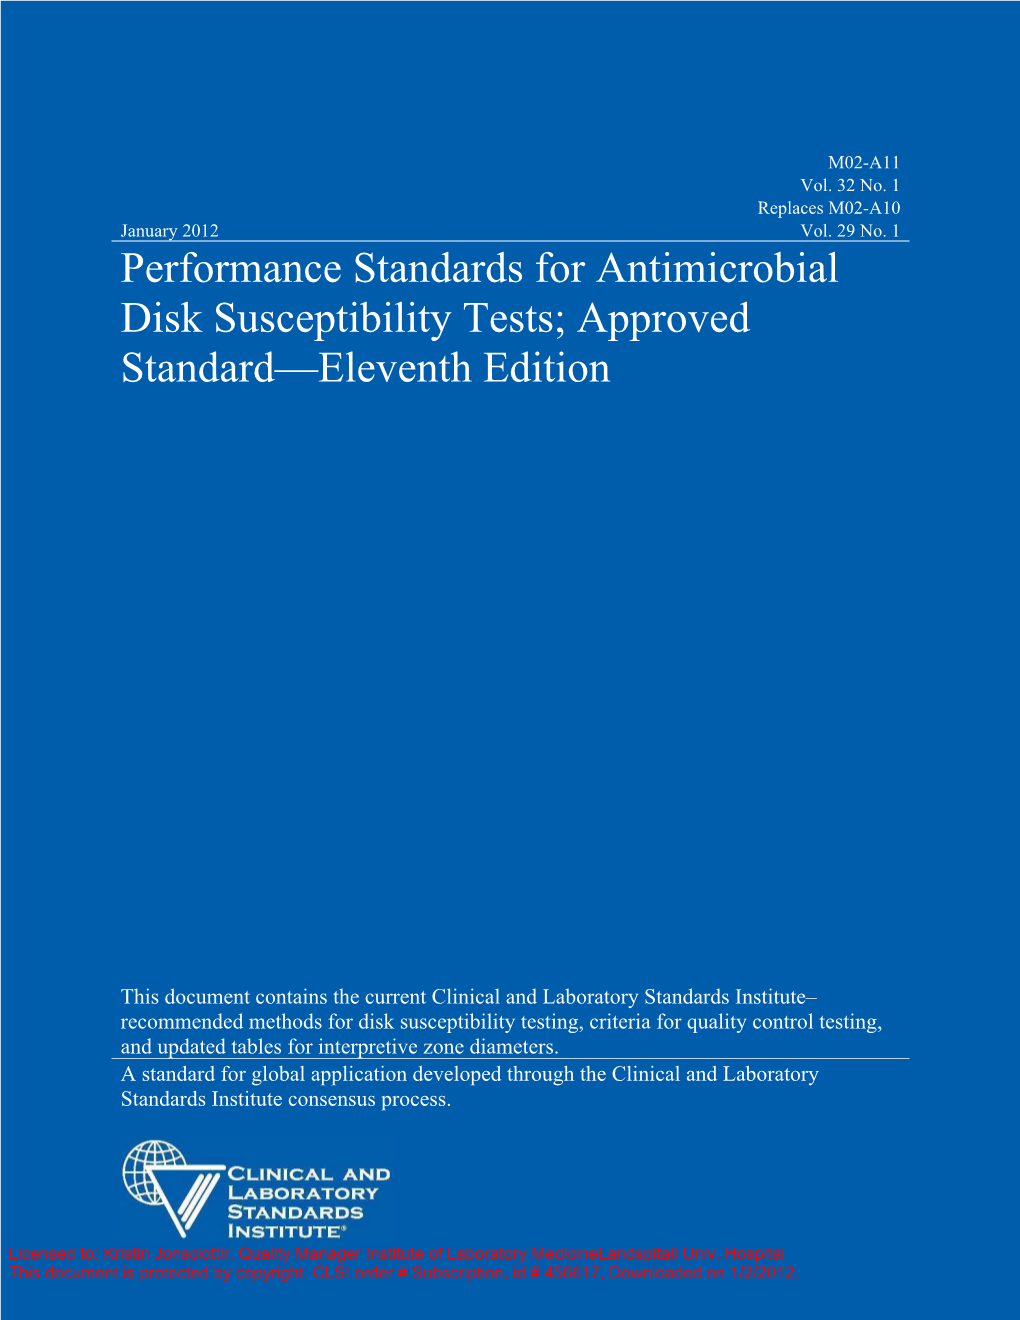 M02-A11: Performance Standards for Antimicrobial Disk Susceptibility Tests; Approved Standard—Eleventh Edition